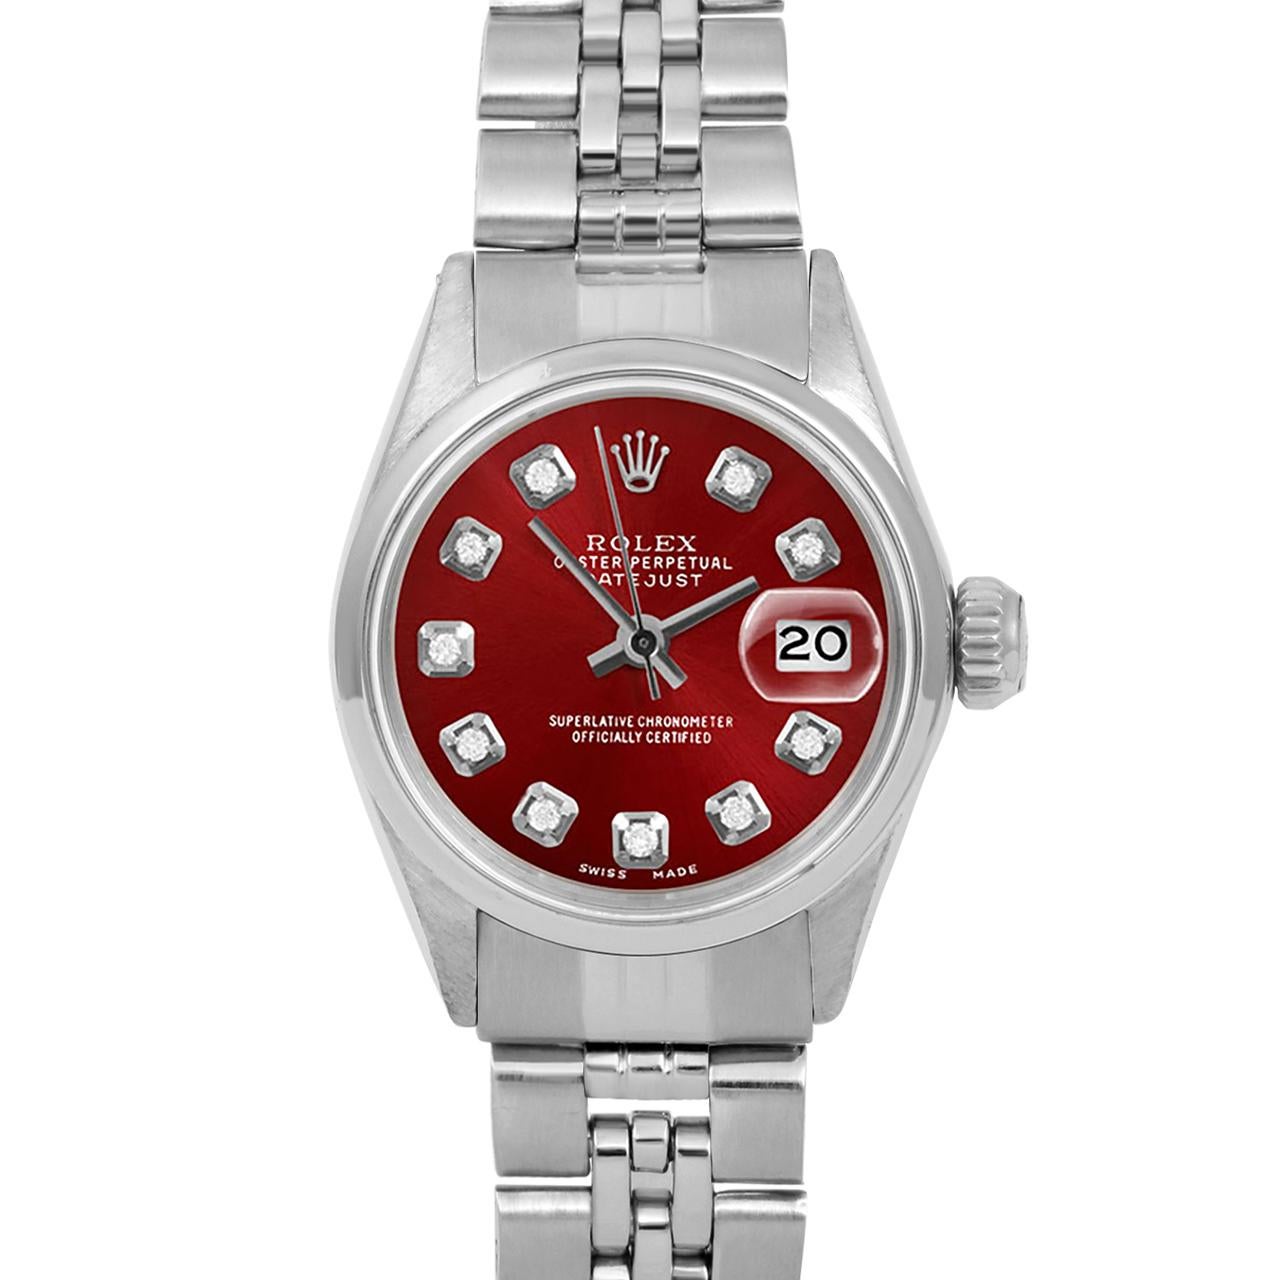 Brand : Rolex
Model : Datejust (Non-Quickset Model)
Gender : Ladies
Metals : Stainless Steel
Case Size : 24 mm

Dial : Custom Red Diamond Dial (This dial is not original Rolex And has been added aftermarket yet is a beautiful Custom addition)

Bezel